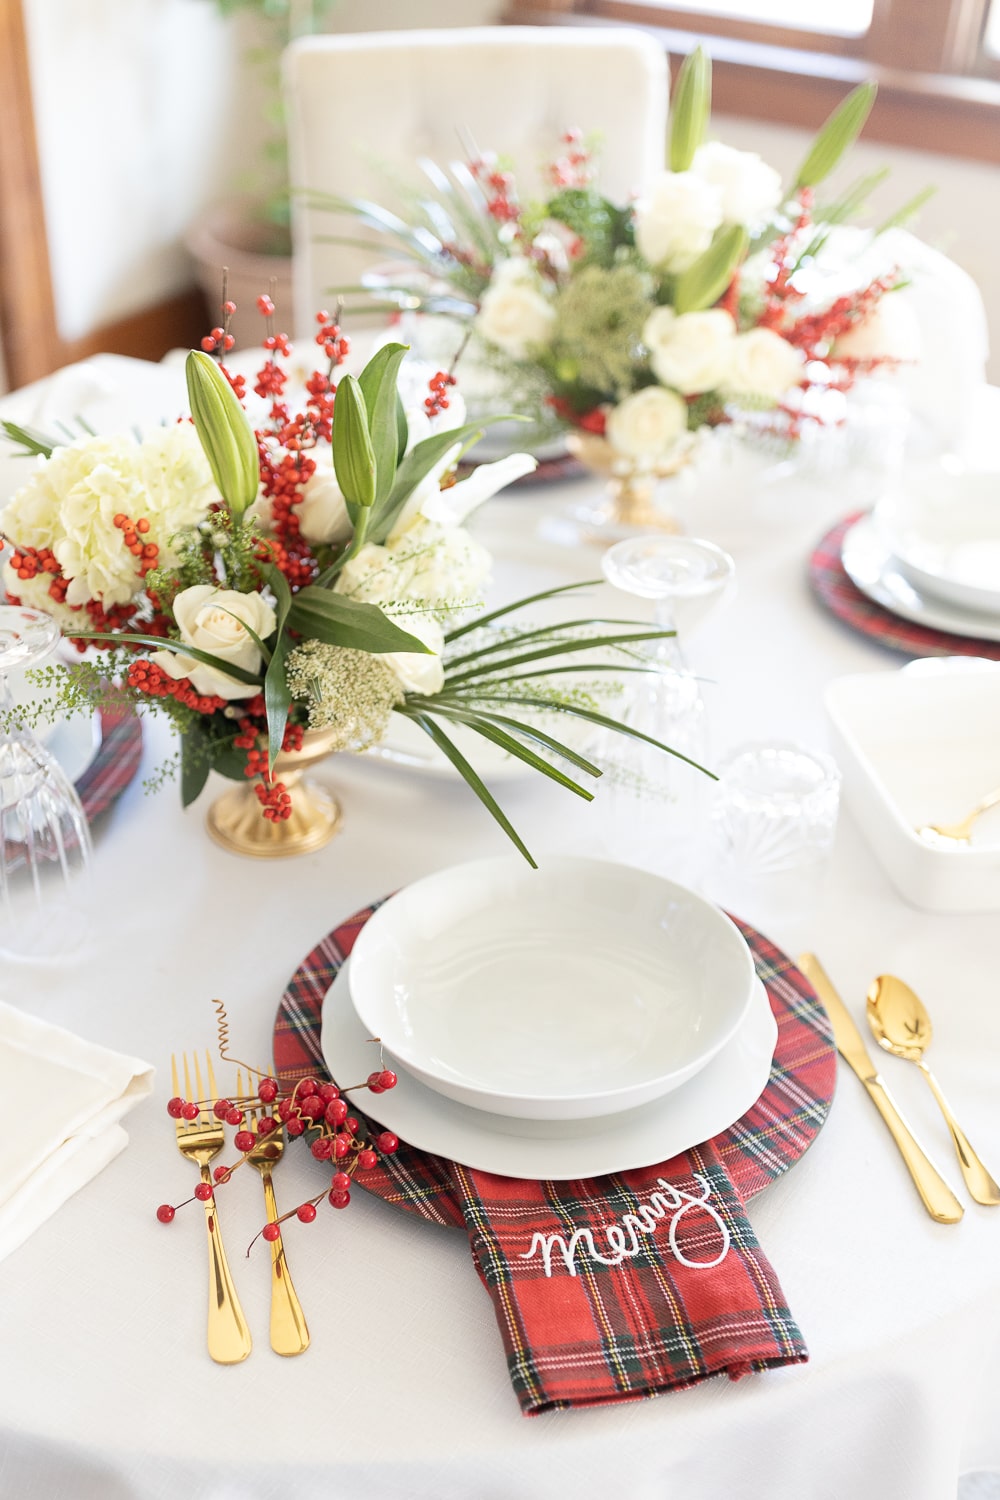 Simple Christmas tablescape designed by blogger Stephanie Ziajka on Diary of a Debutante